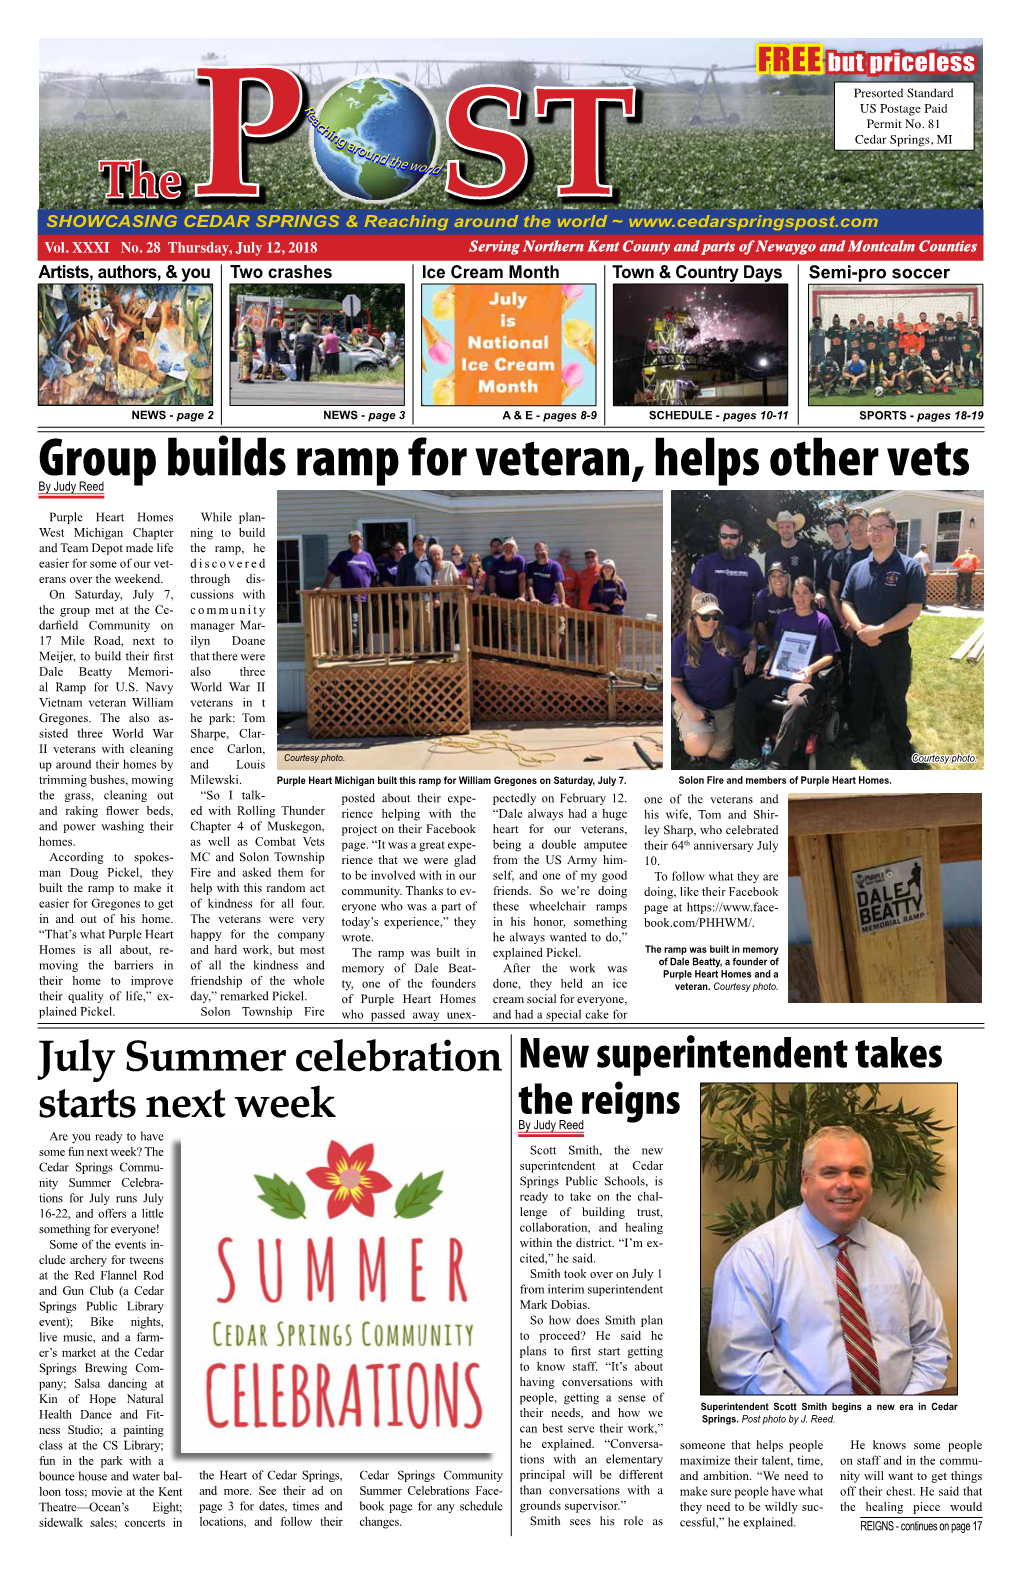 Group Builds Ramp for Veteran, Helps Other Vets by Judy Reed